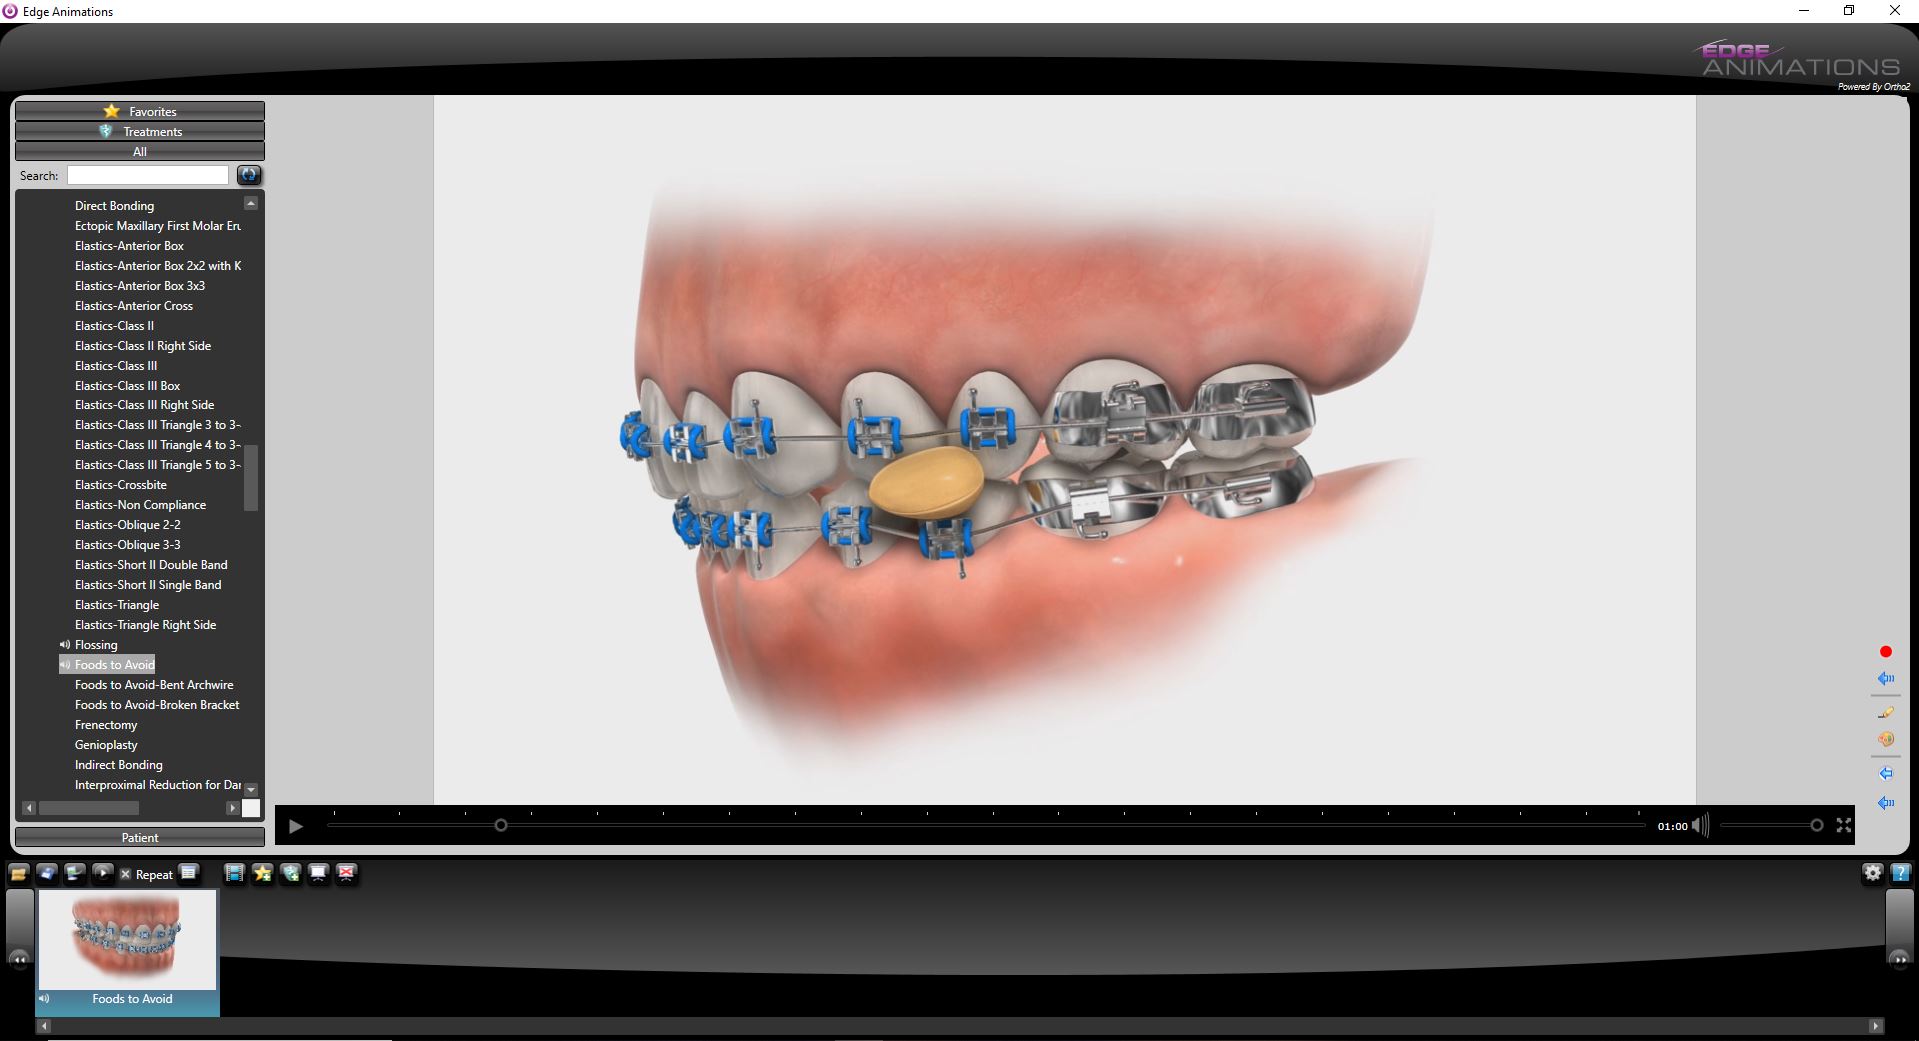 Educational videos for your pediatric dental and orthodontic patients.